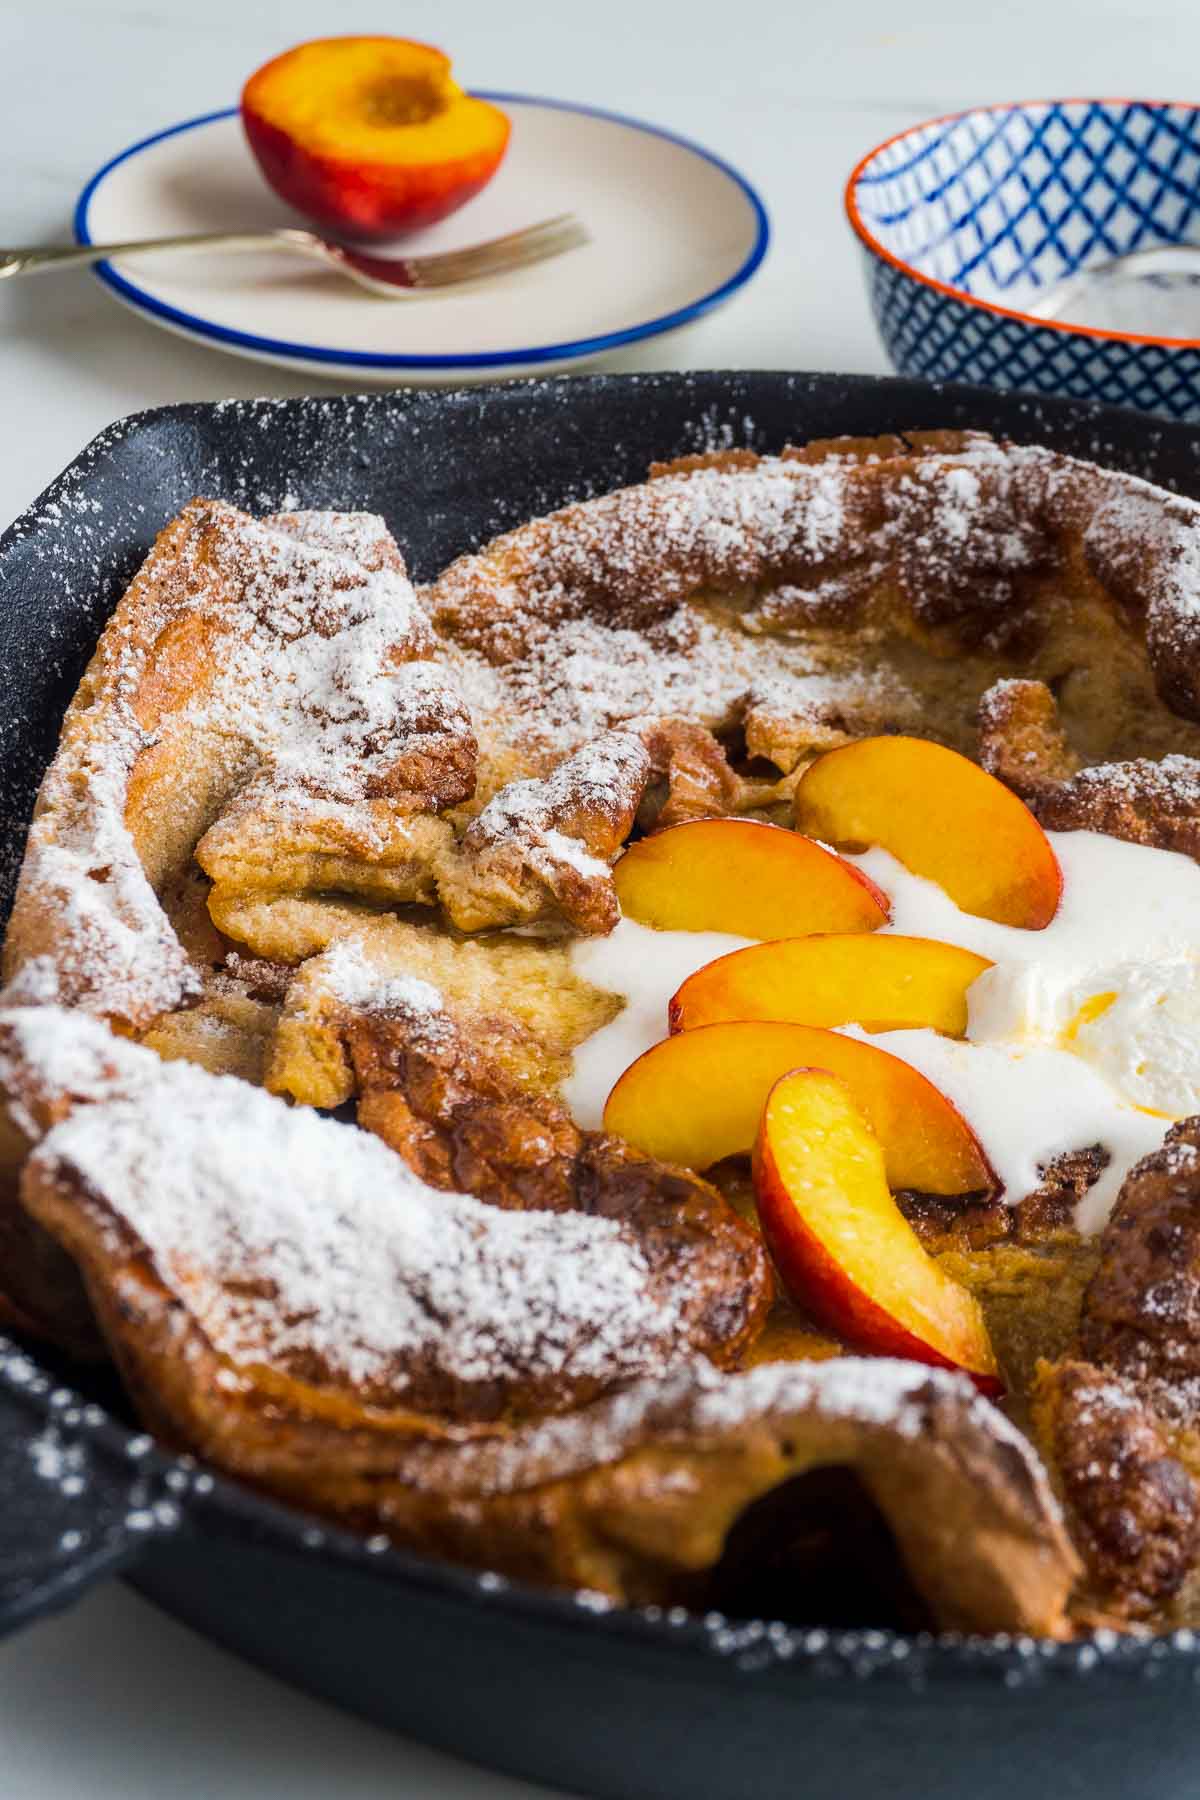 Icing sugar on a Dutch Baby Pancake with Peaches and melted ice cream.